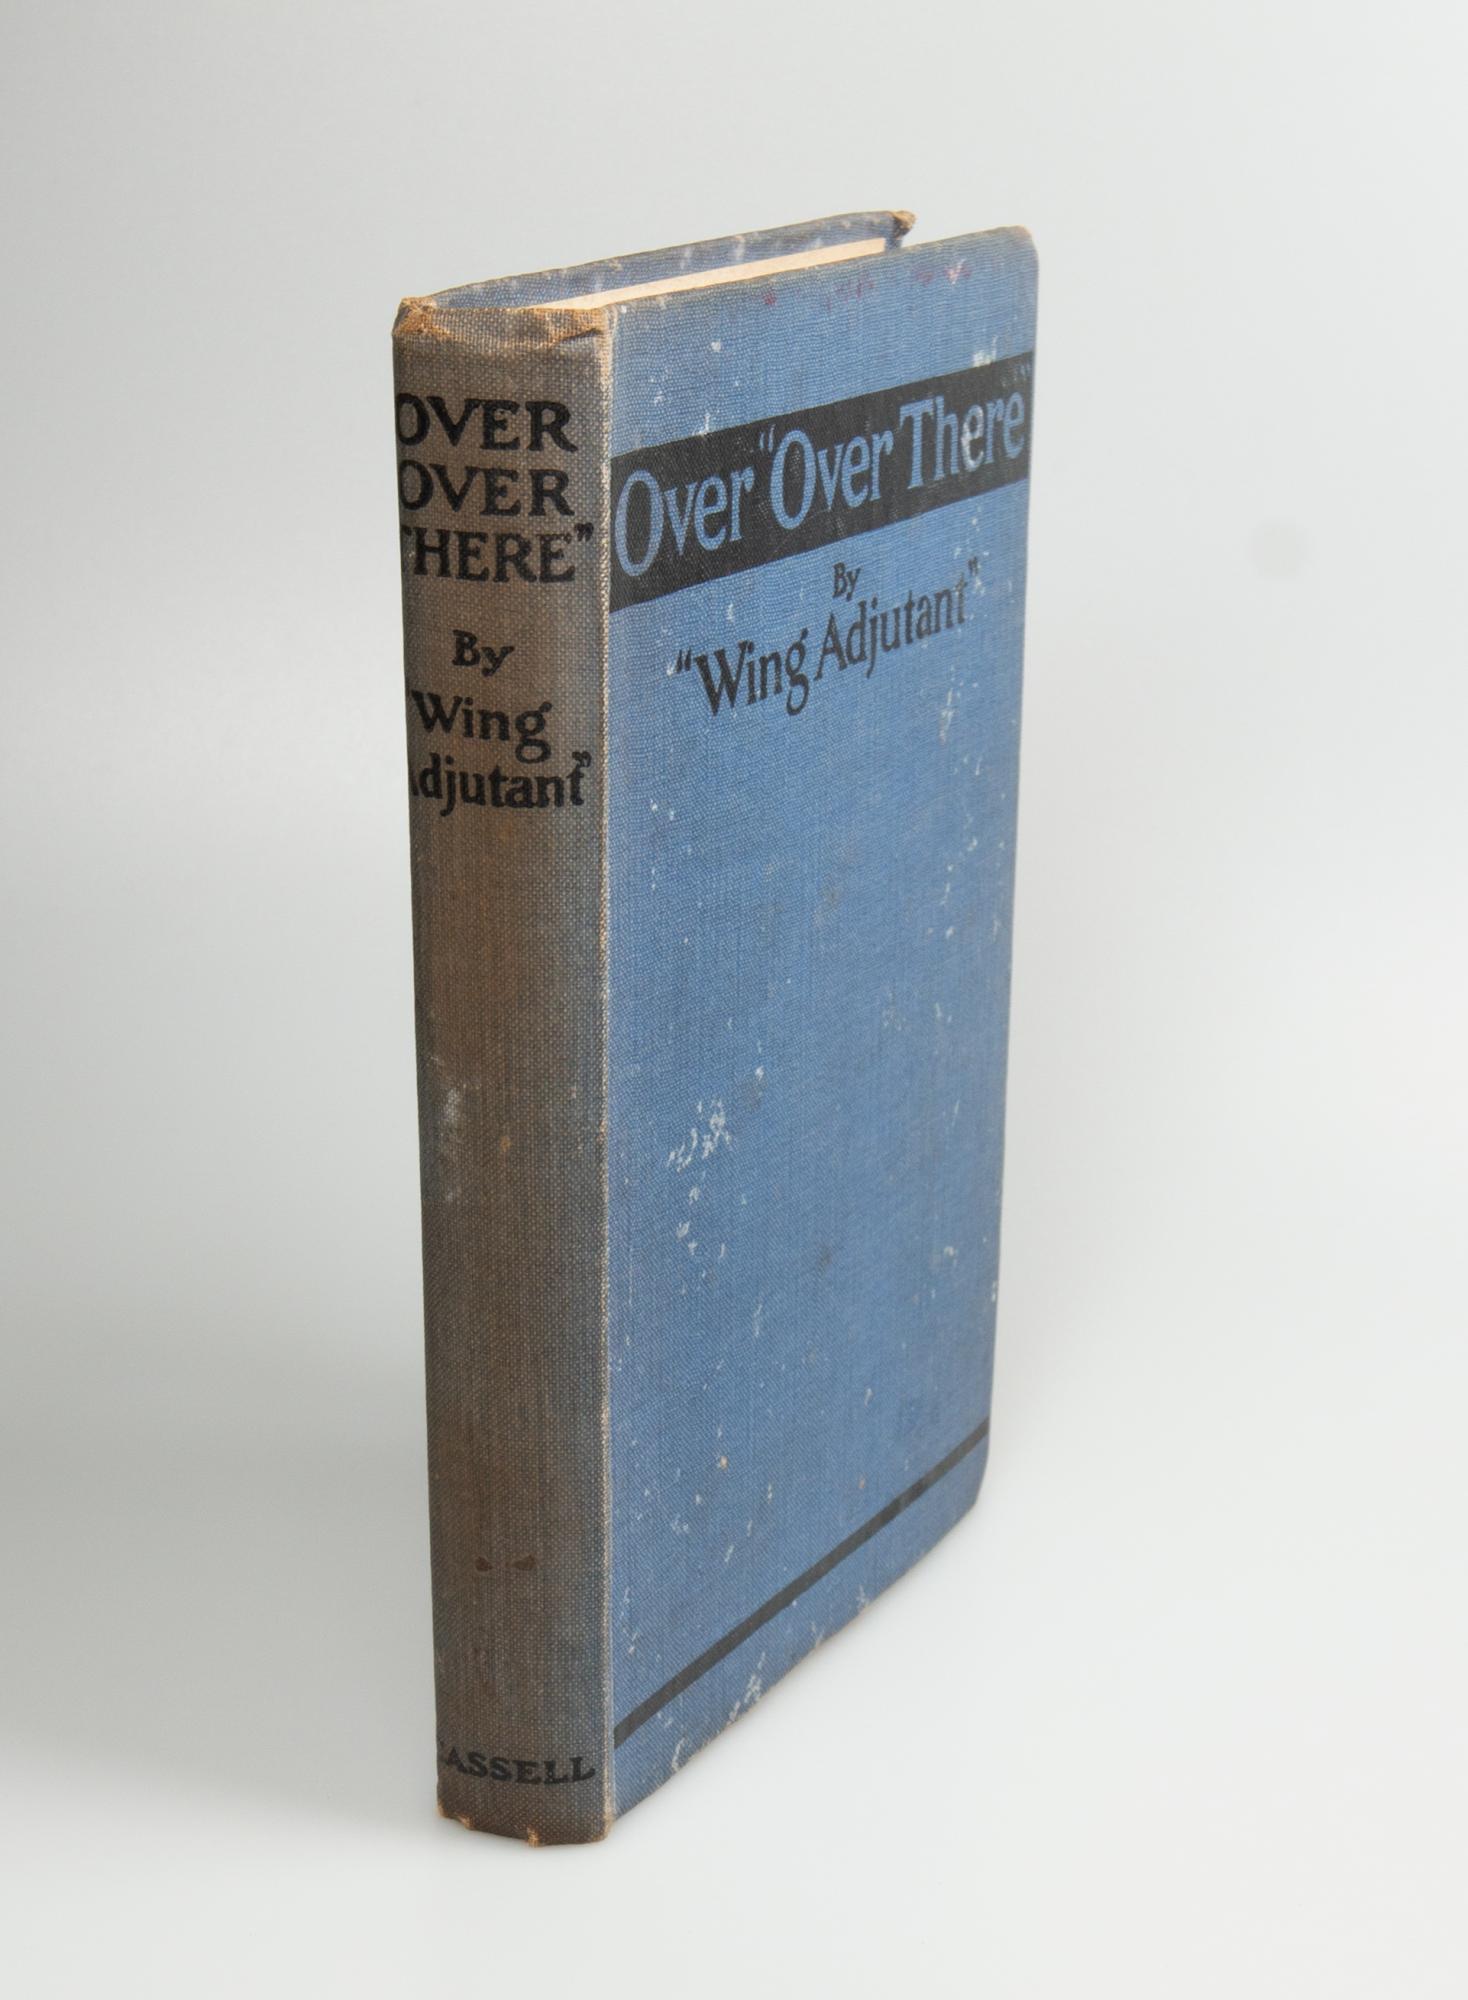 Over Over There By Wing Adjudant Blake Wilfred J 1918 Rare 